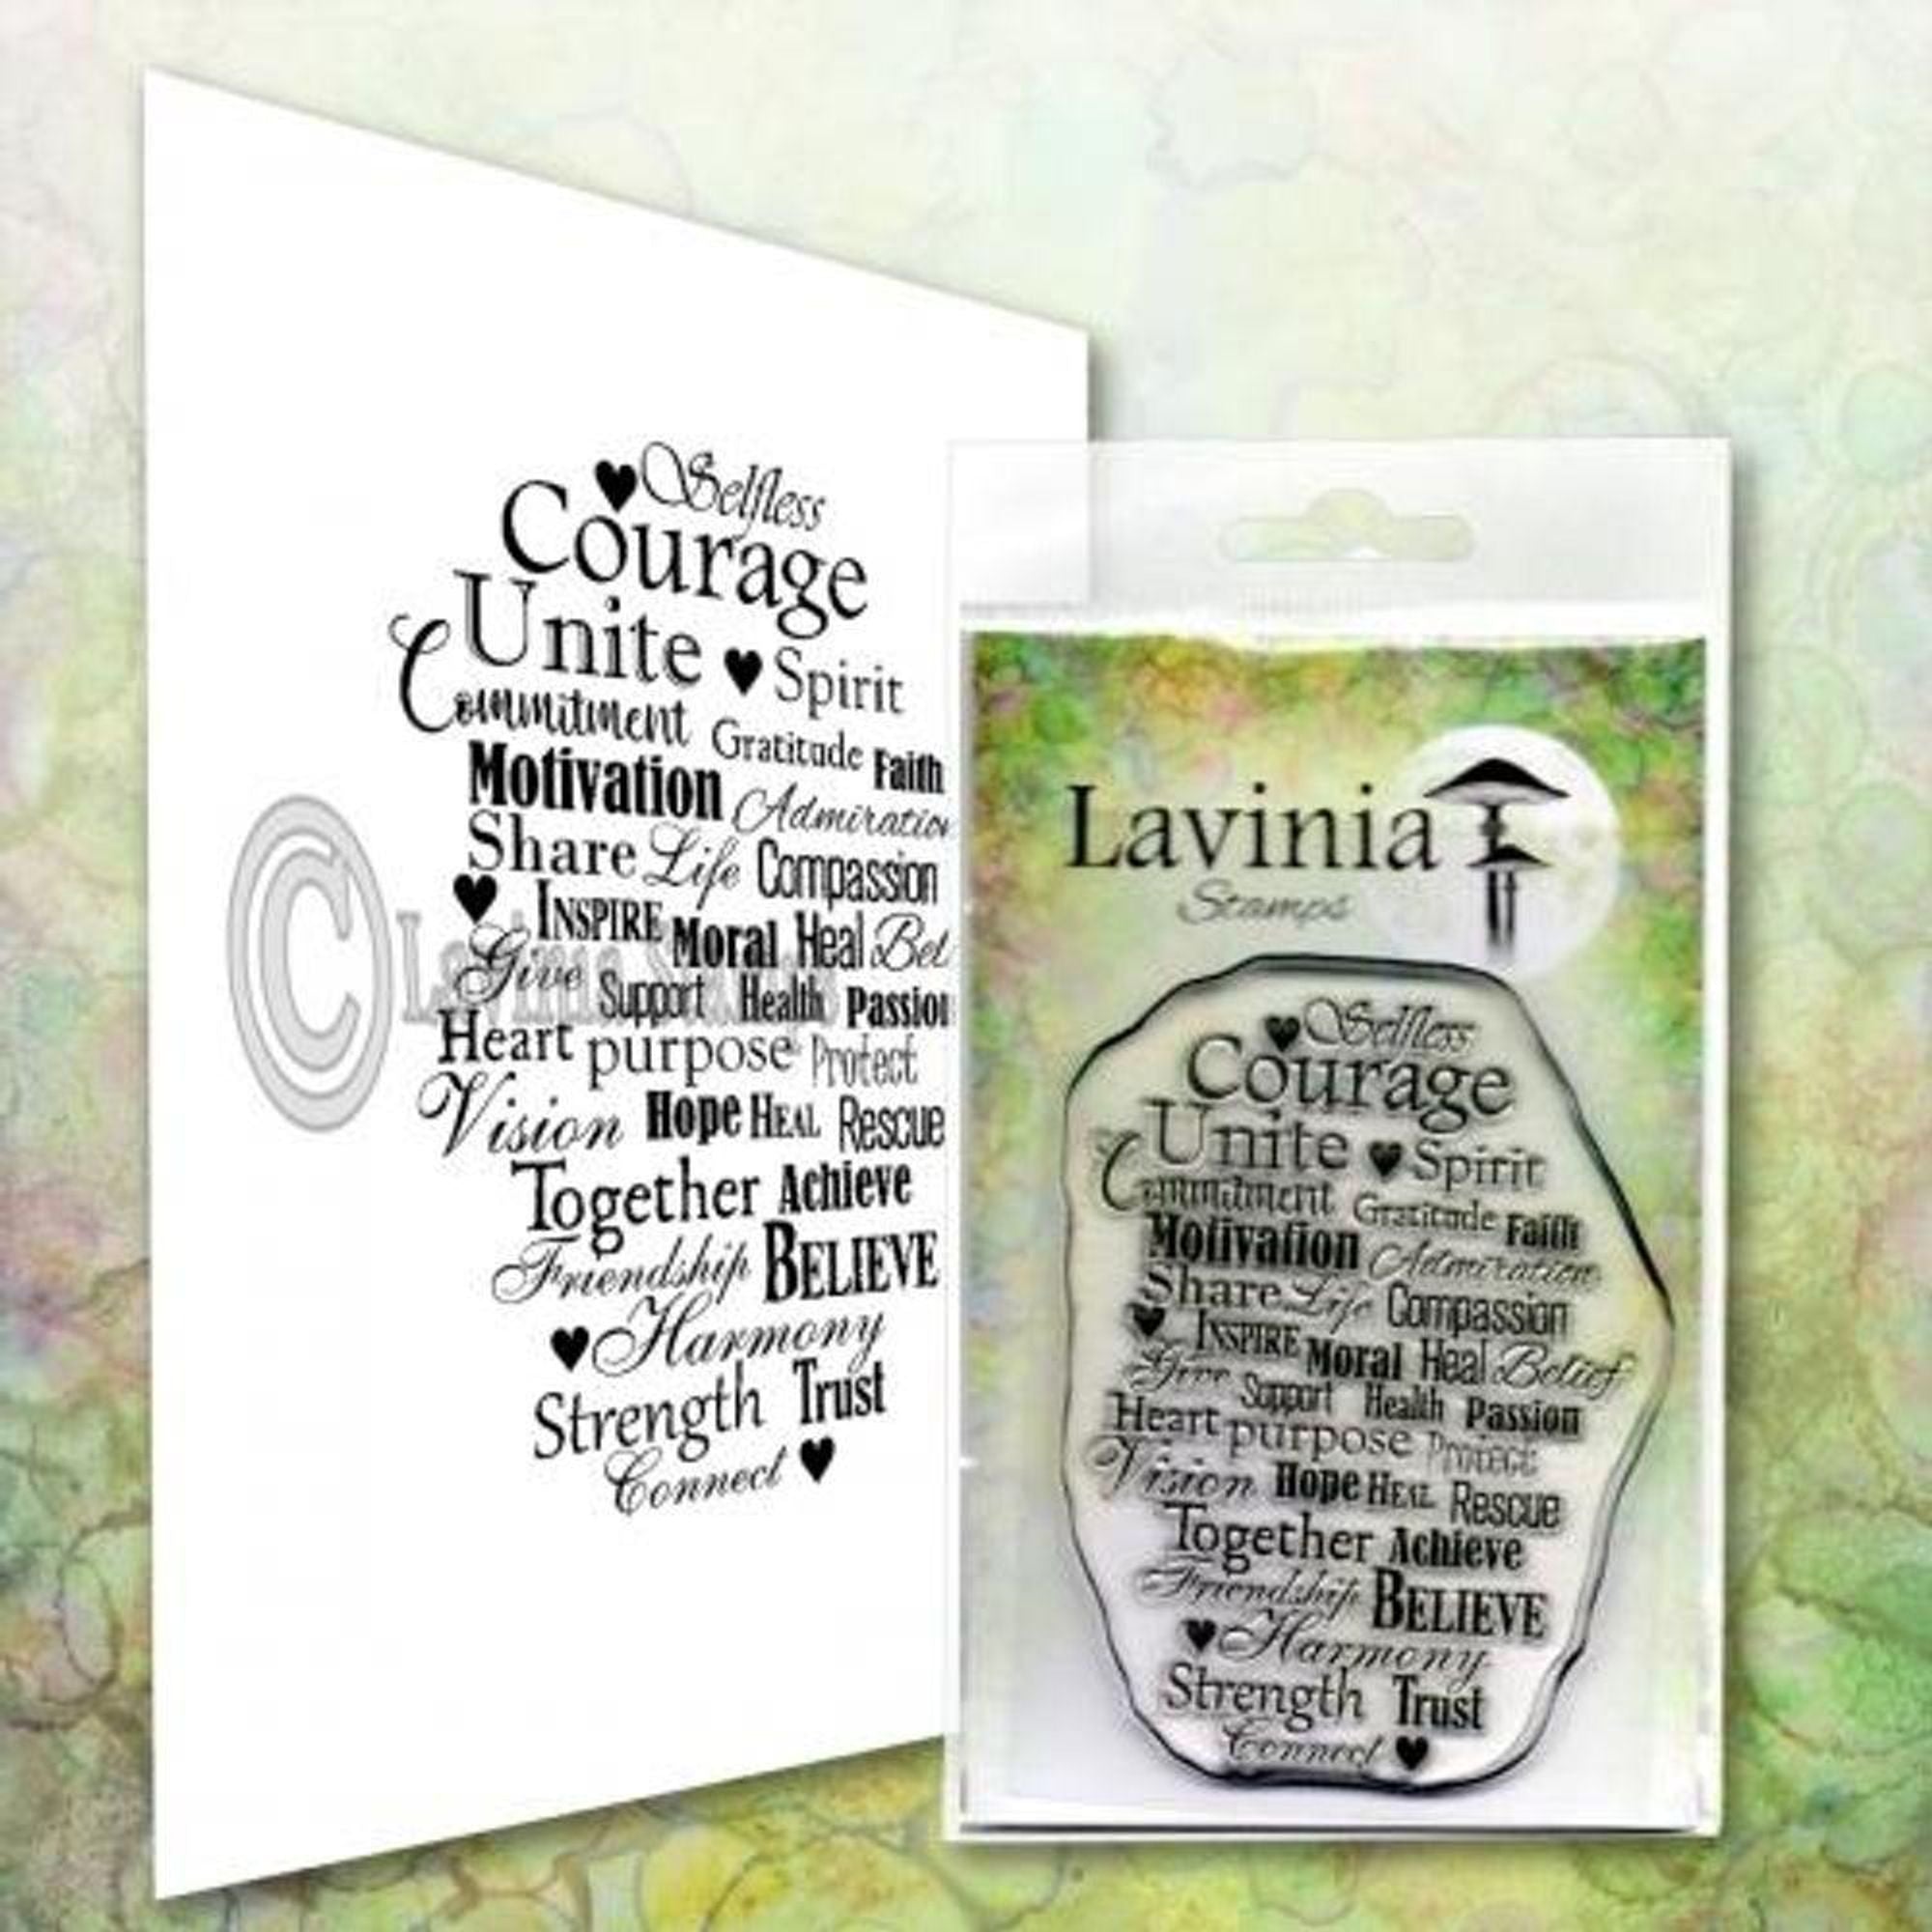 Lavinia Stamps - Clear Stamp - Heart Large